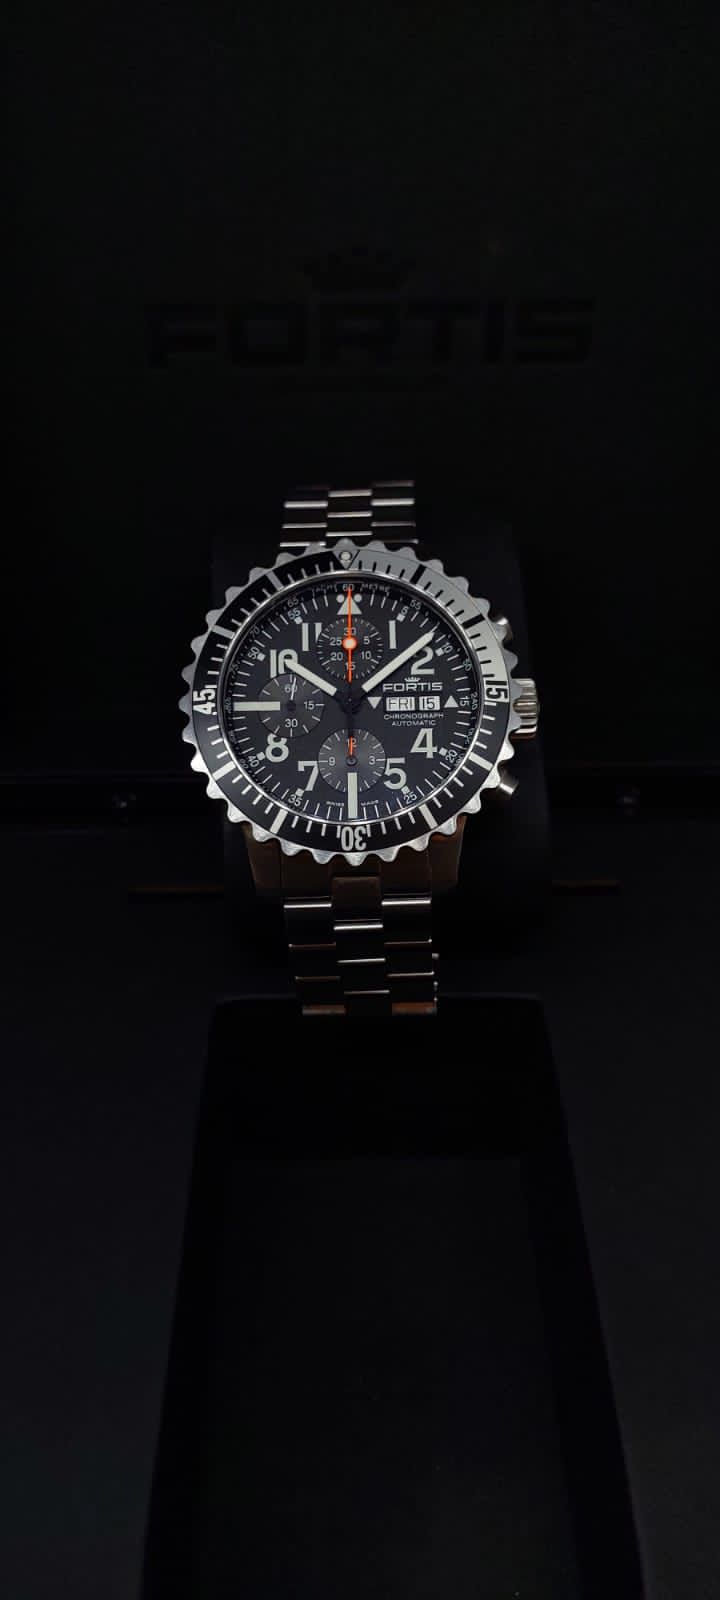 MARINE MASTER 42 SILVER CHRONOGRAPH STEEL BLACK DIAL SPECIAL EDITION (2020)